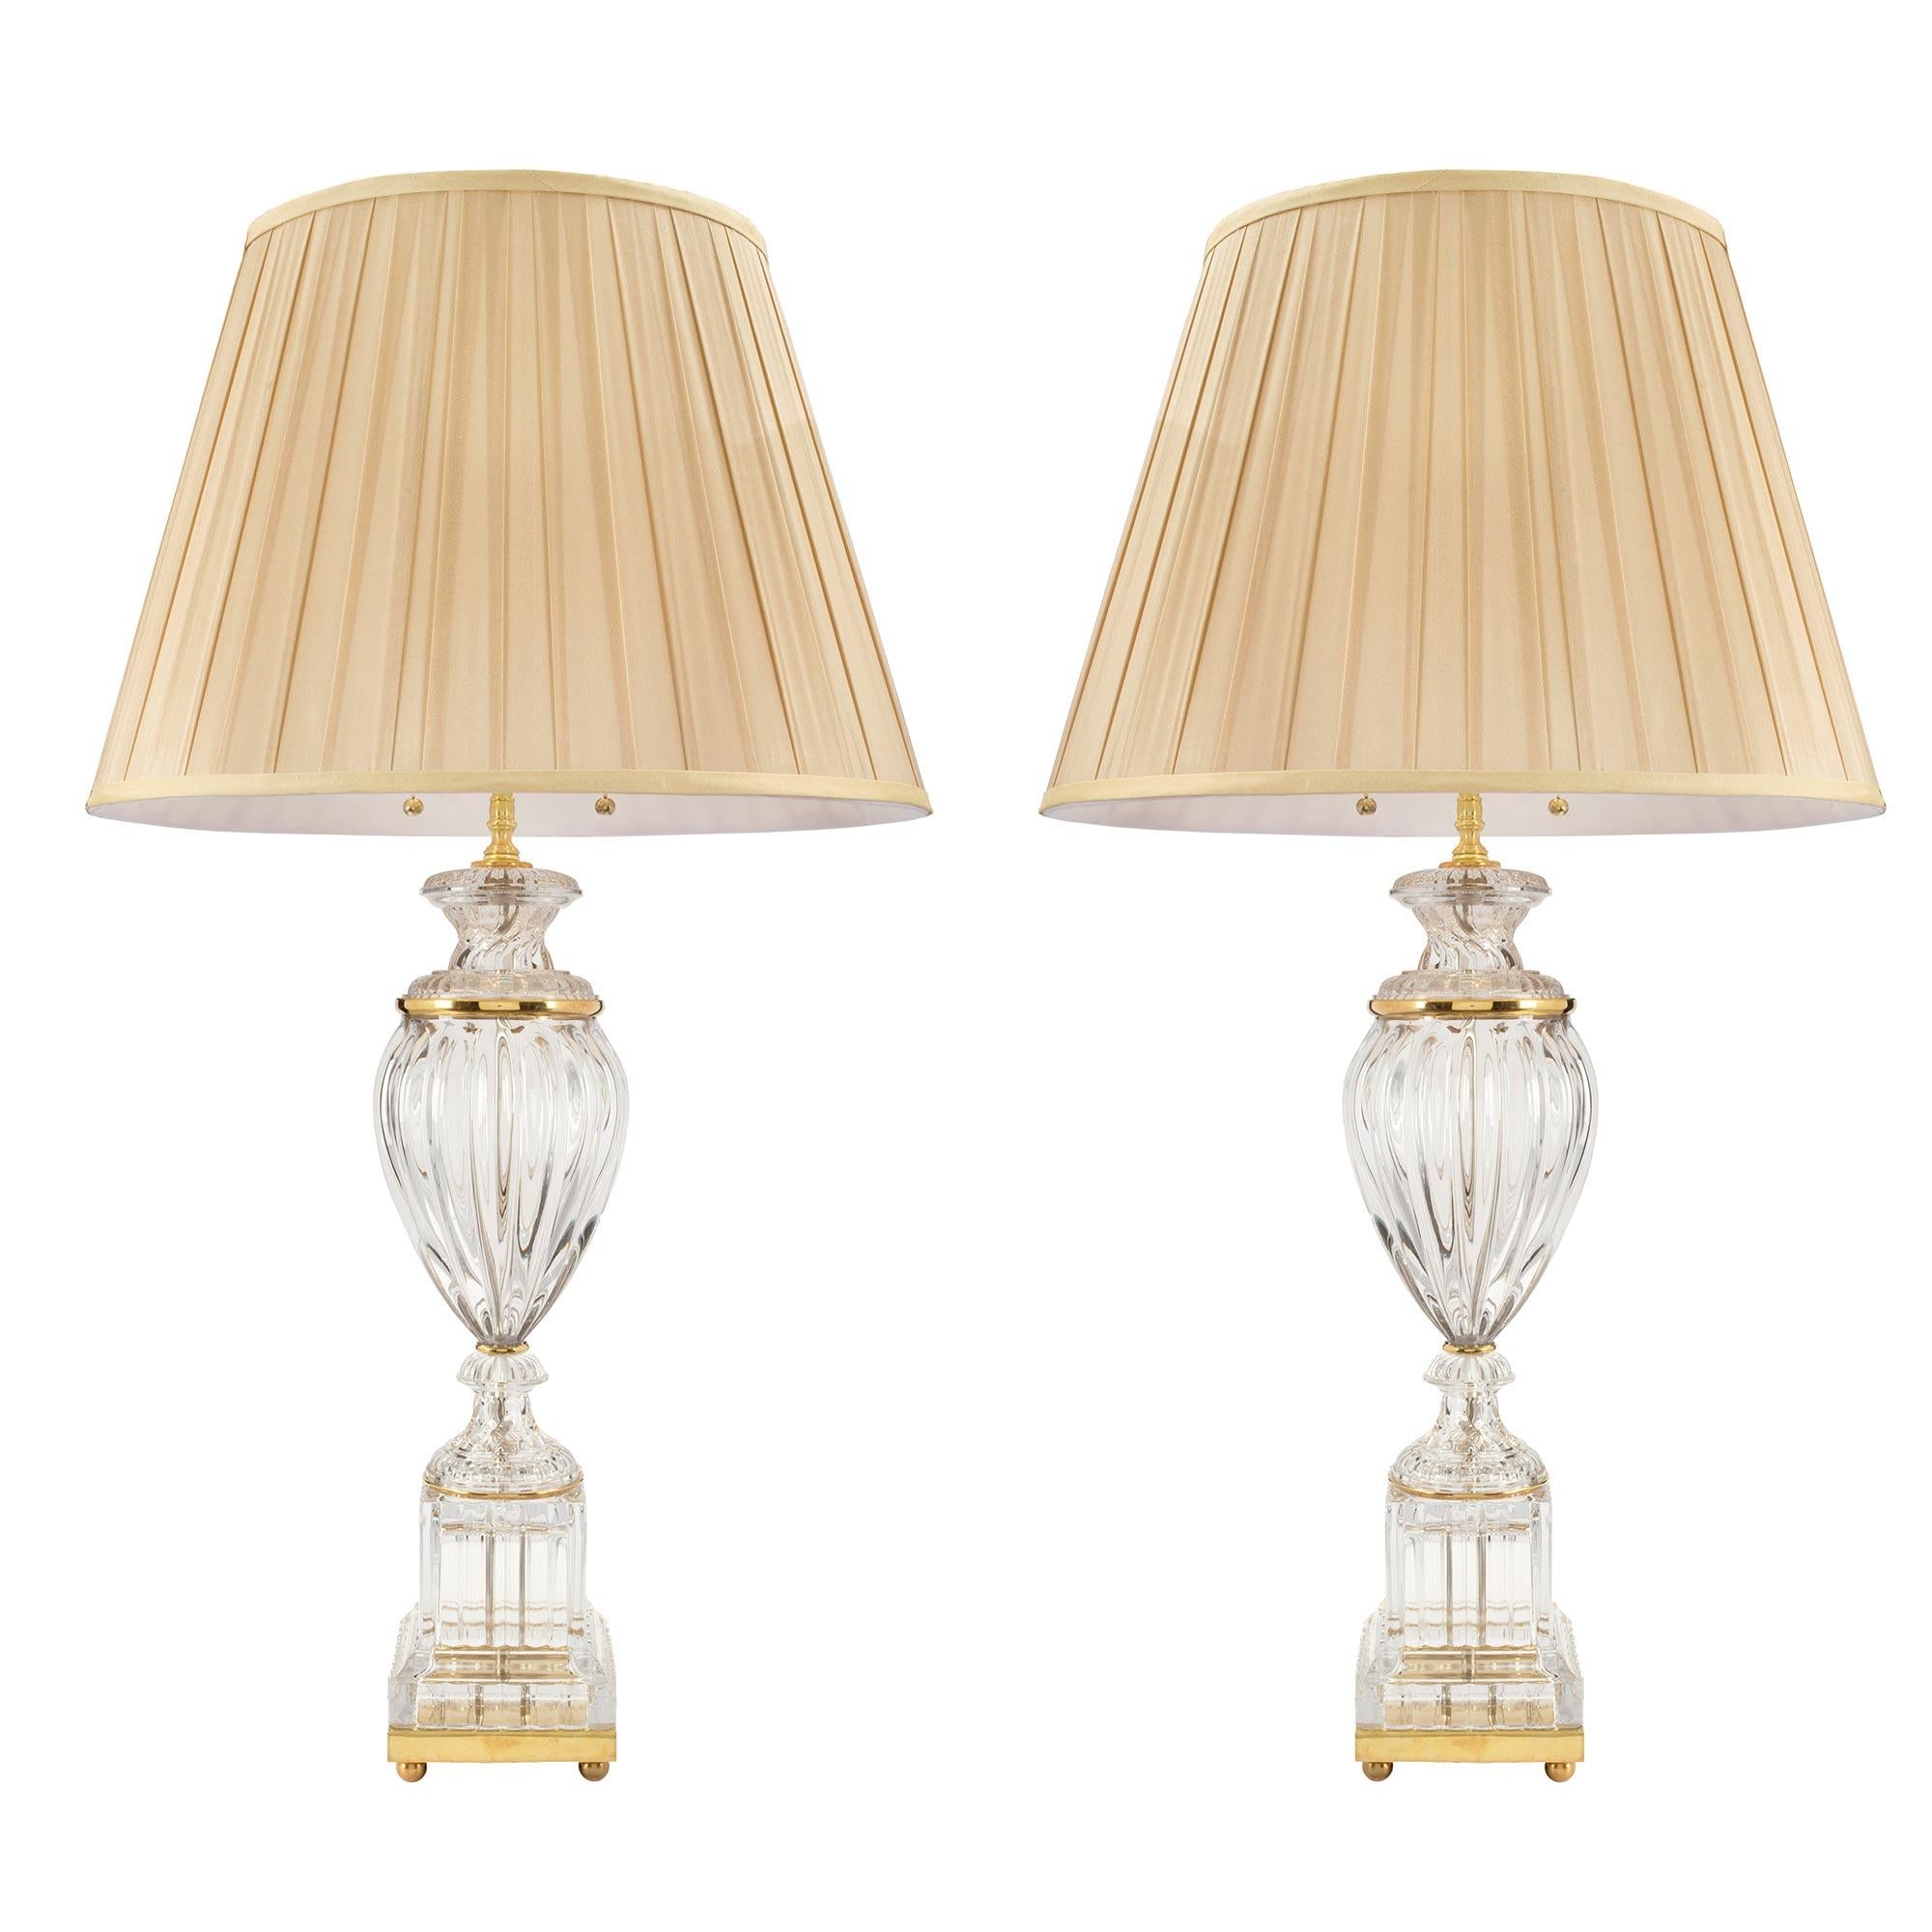 A pair of stunning and very elegant French Louis XVI style Baccarat style crystal and ormolu lamps. Each lamp is raised on ormolu ball feet below the ormolu support. At the bottom is a square cut base at rectangular column. Above is a baluster